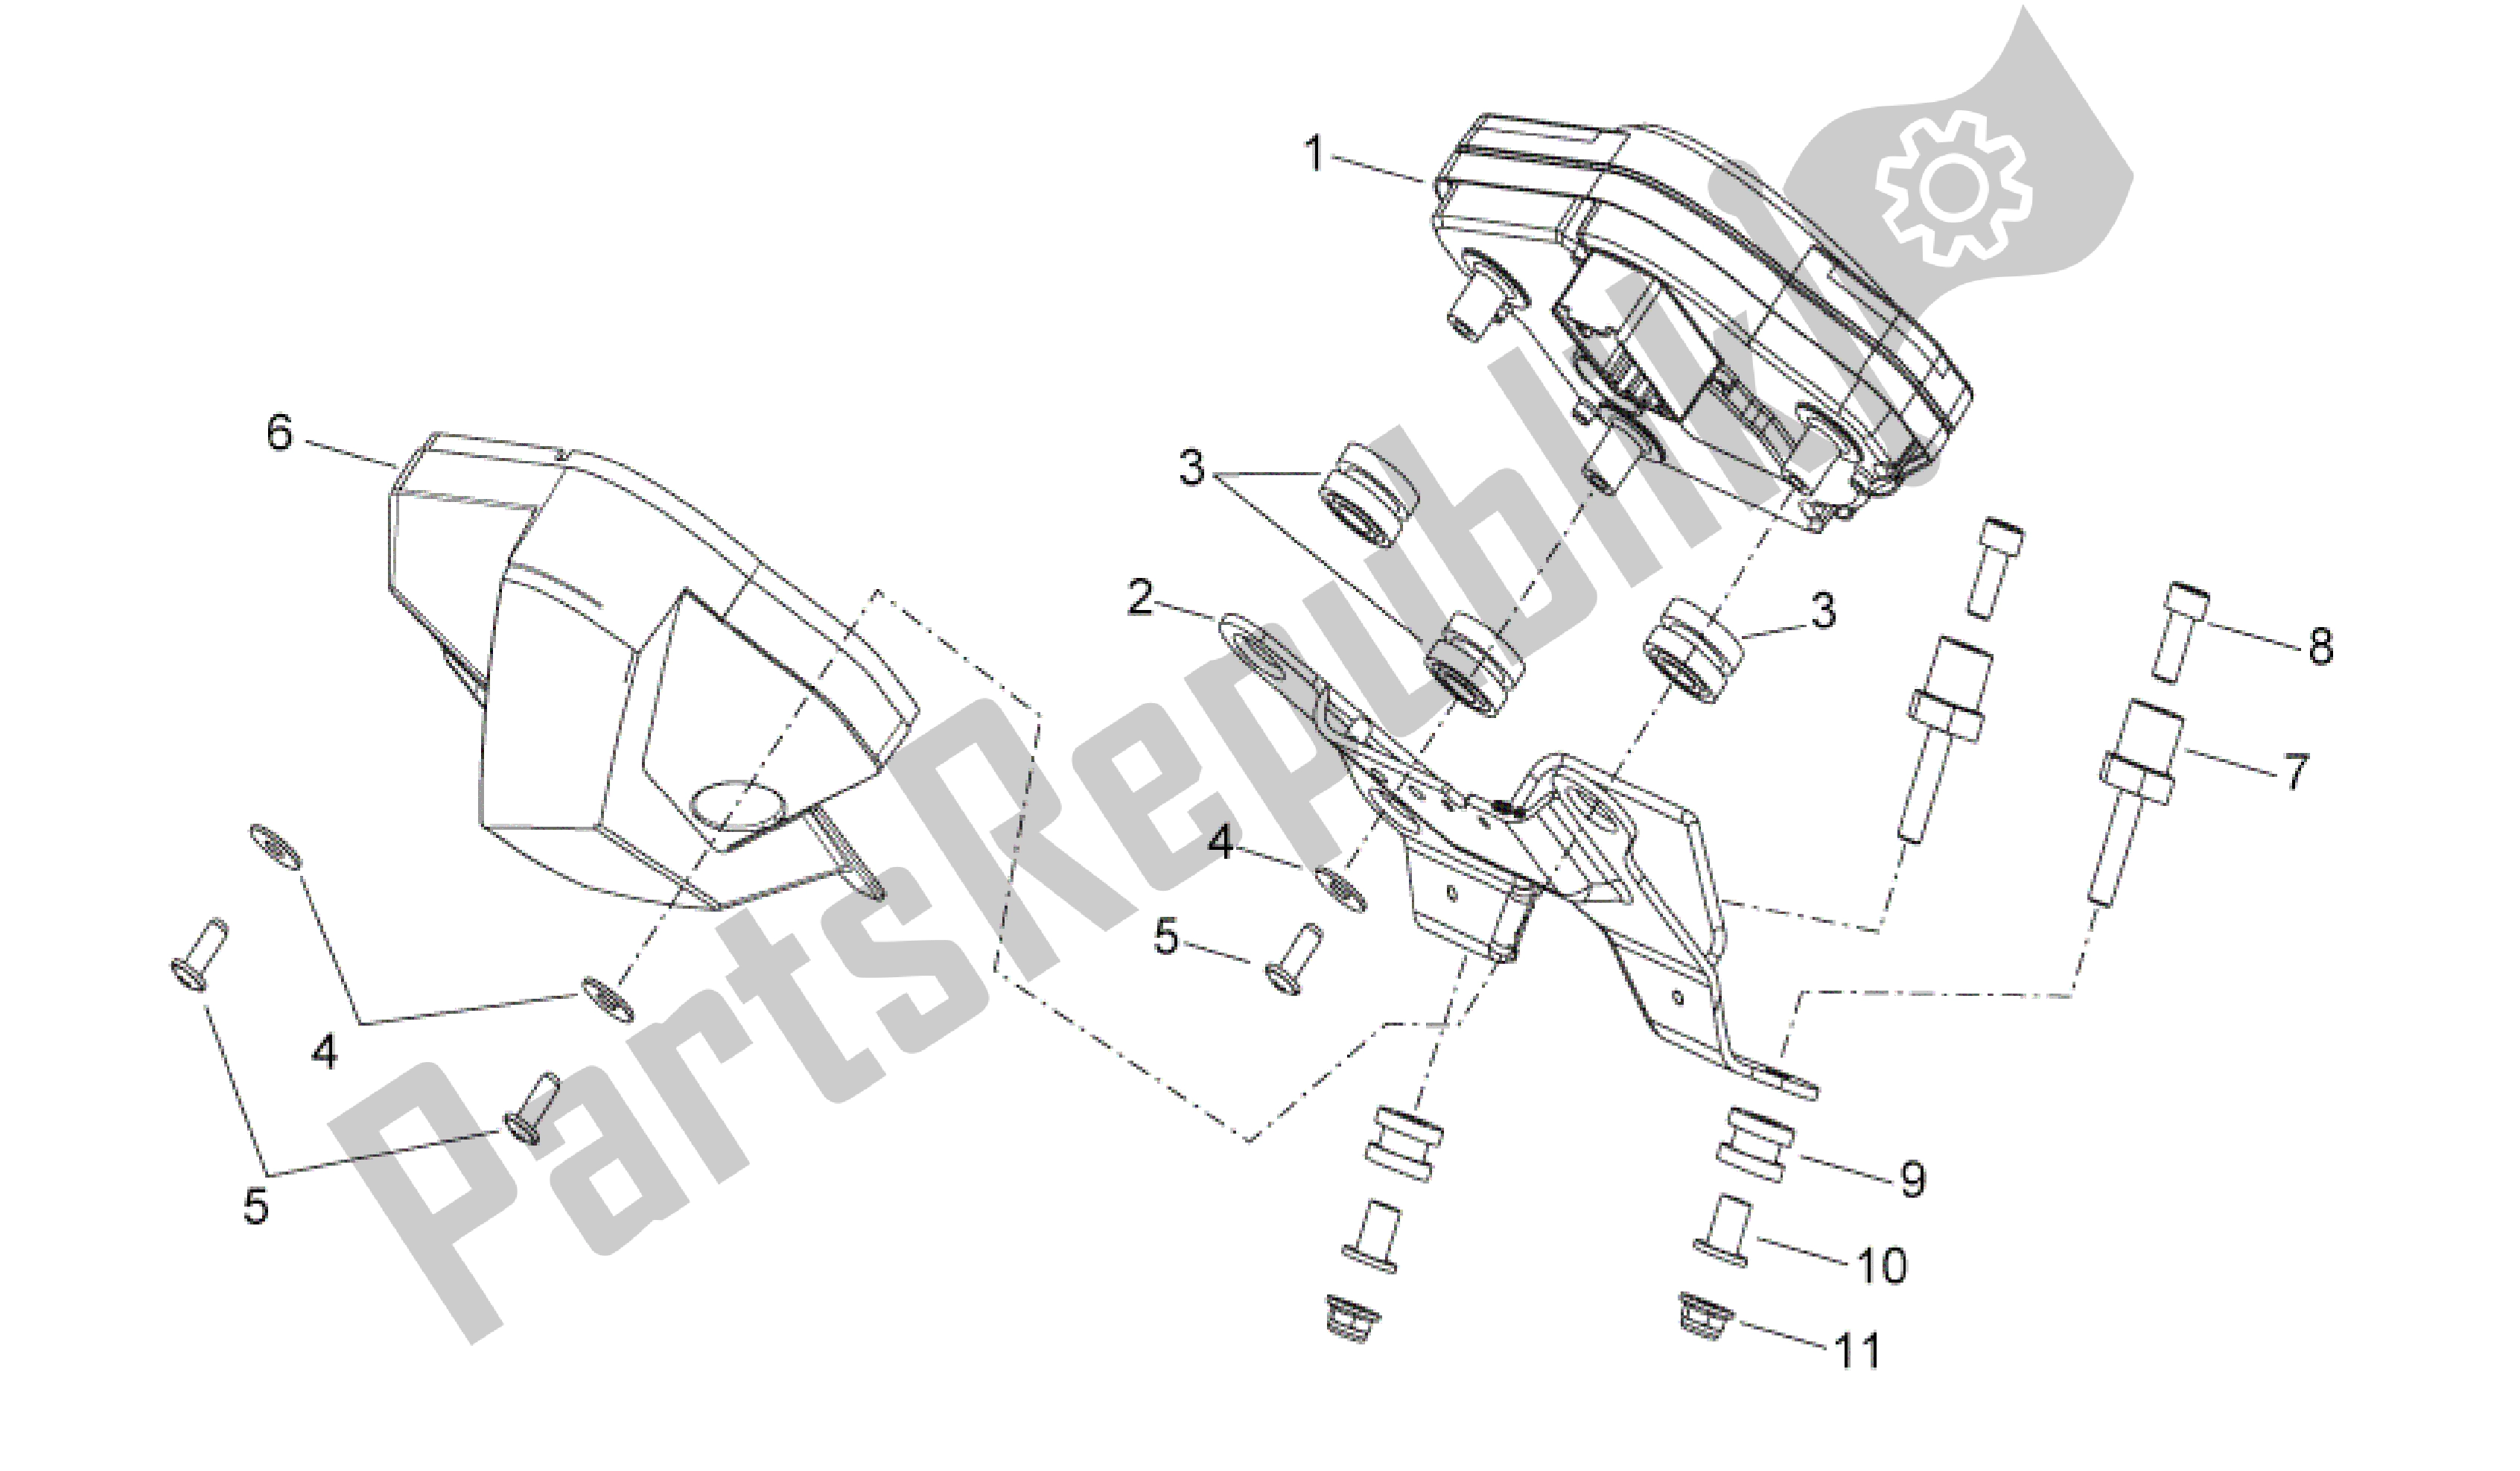 All parts for the Dashboard of the Aprilia Shiver 750 2010 - 2013